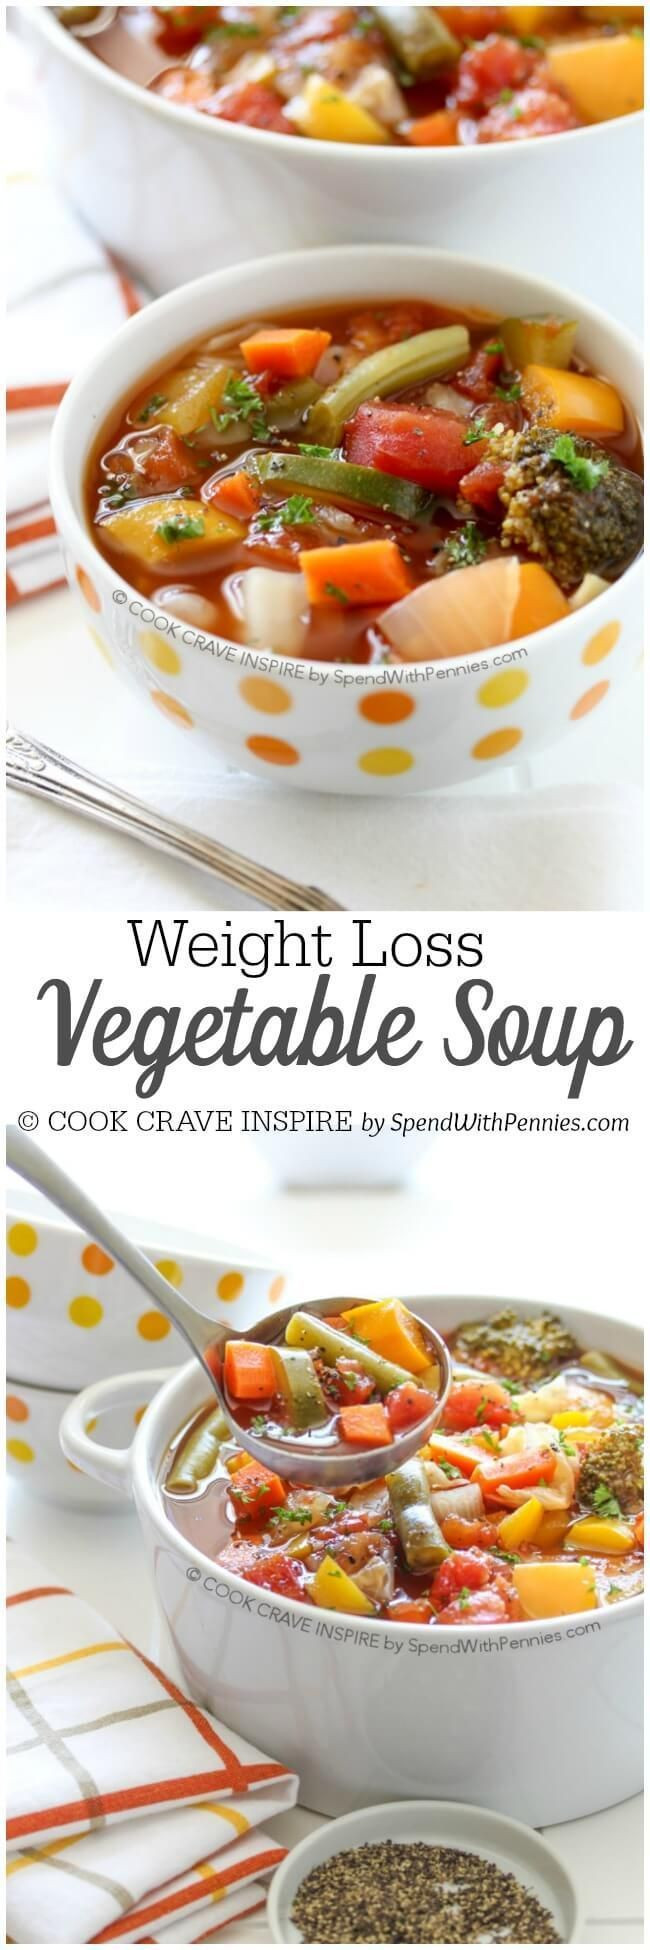 Low Calorie Soup Recipes For Weight Loss
 This Weight Loss Ve able Soup Recipe is one of our